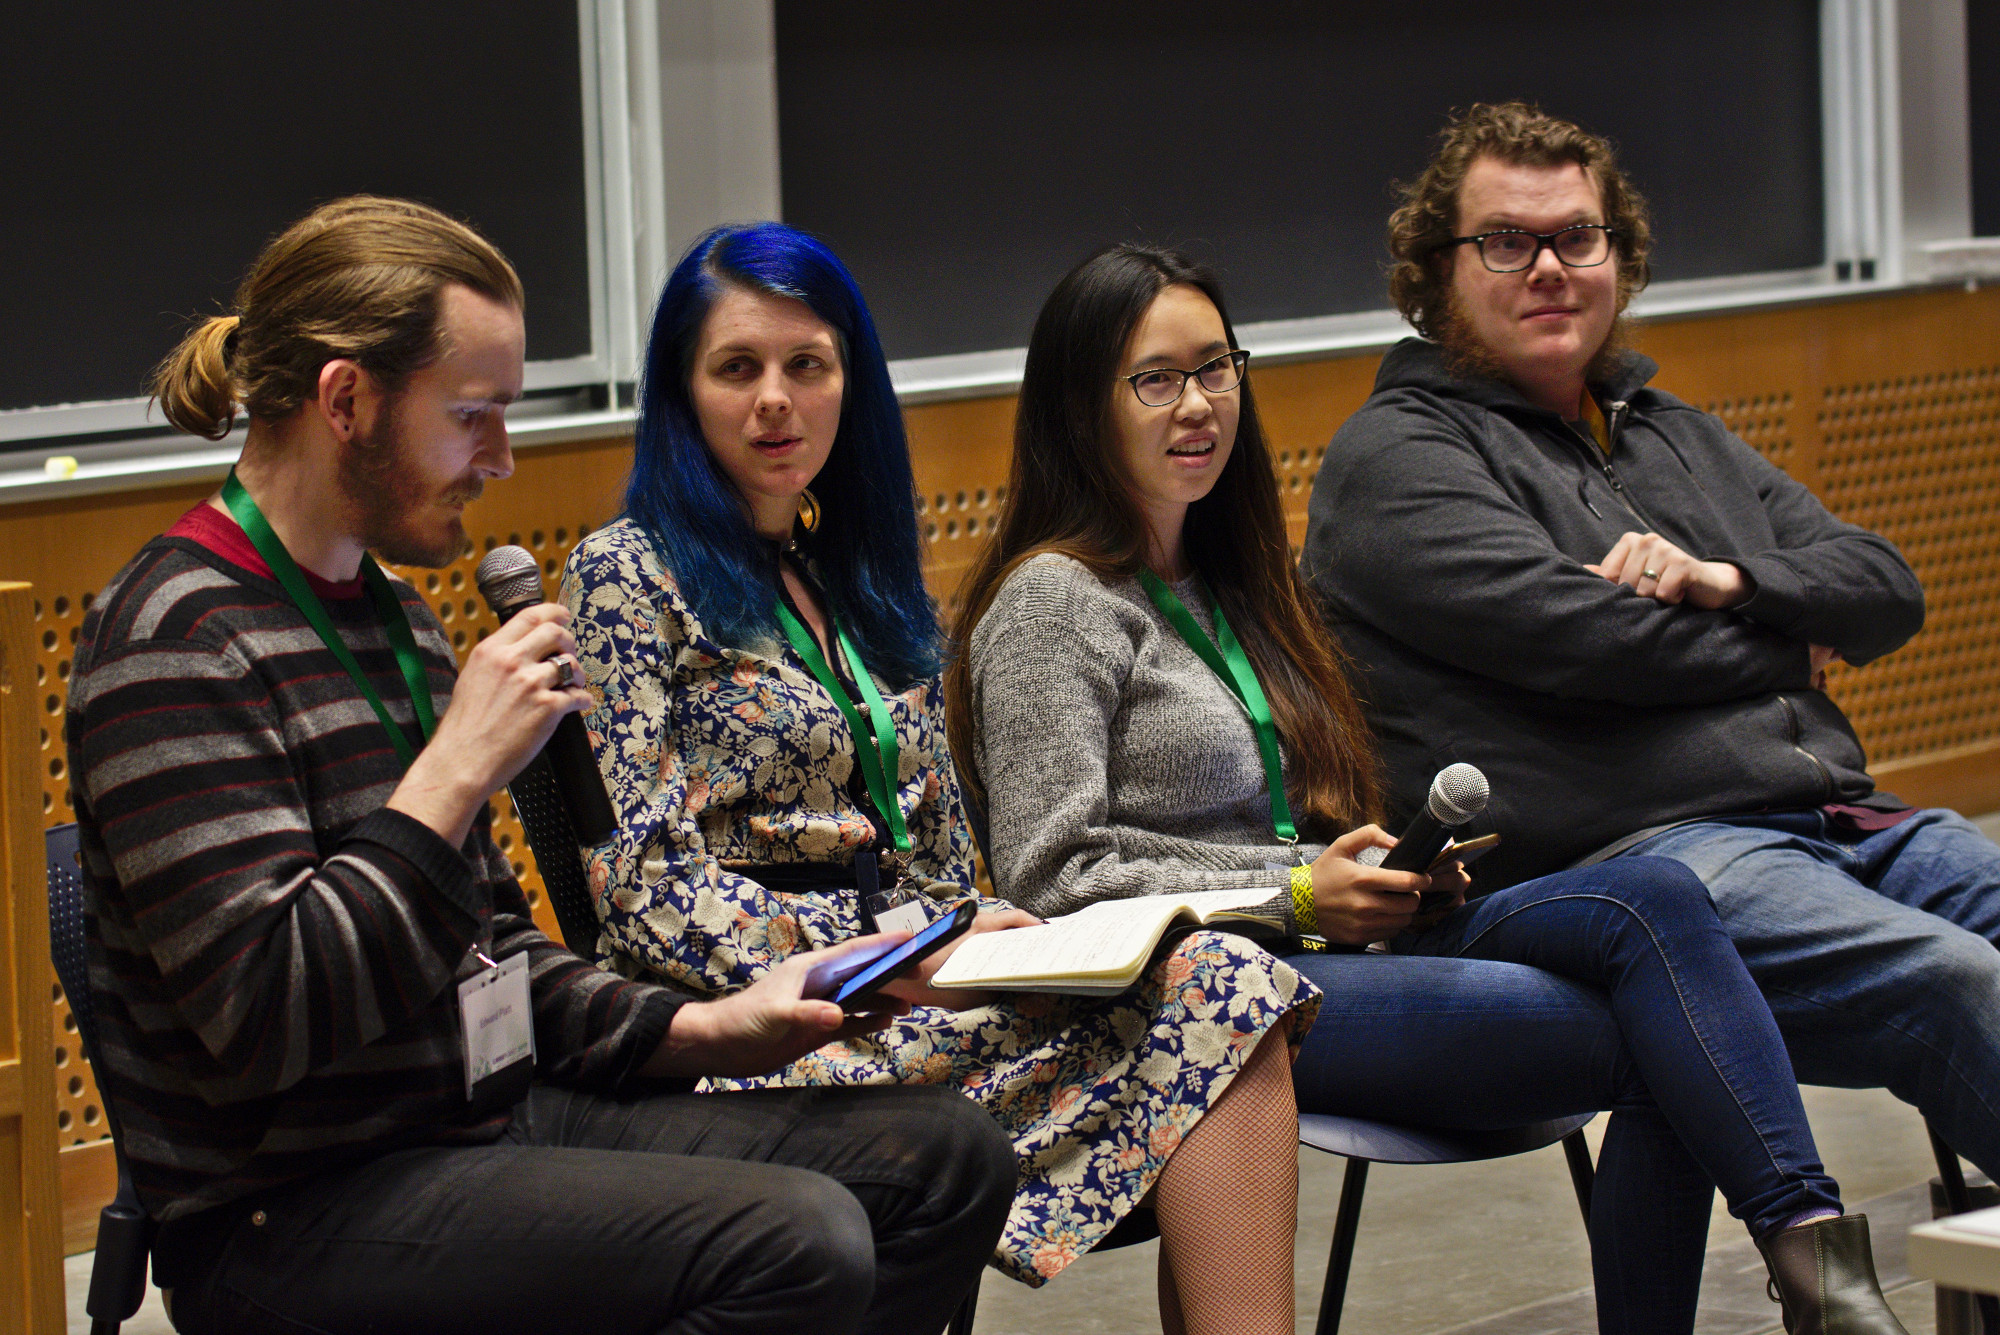 [ Edward Platt, Valerie Young, Christopher Webber, Amy Zhang sitting together as co-panelists at LibrePlanet 2019.  ]